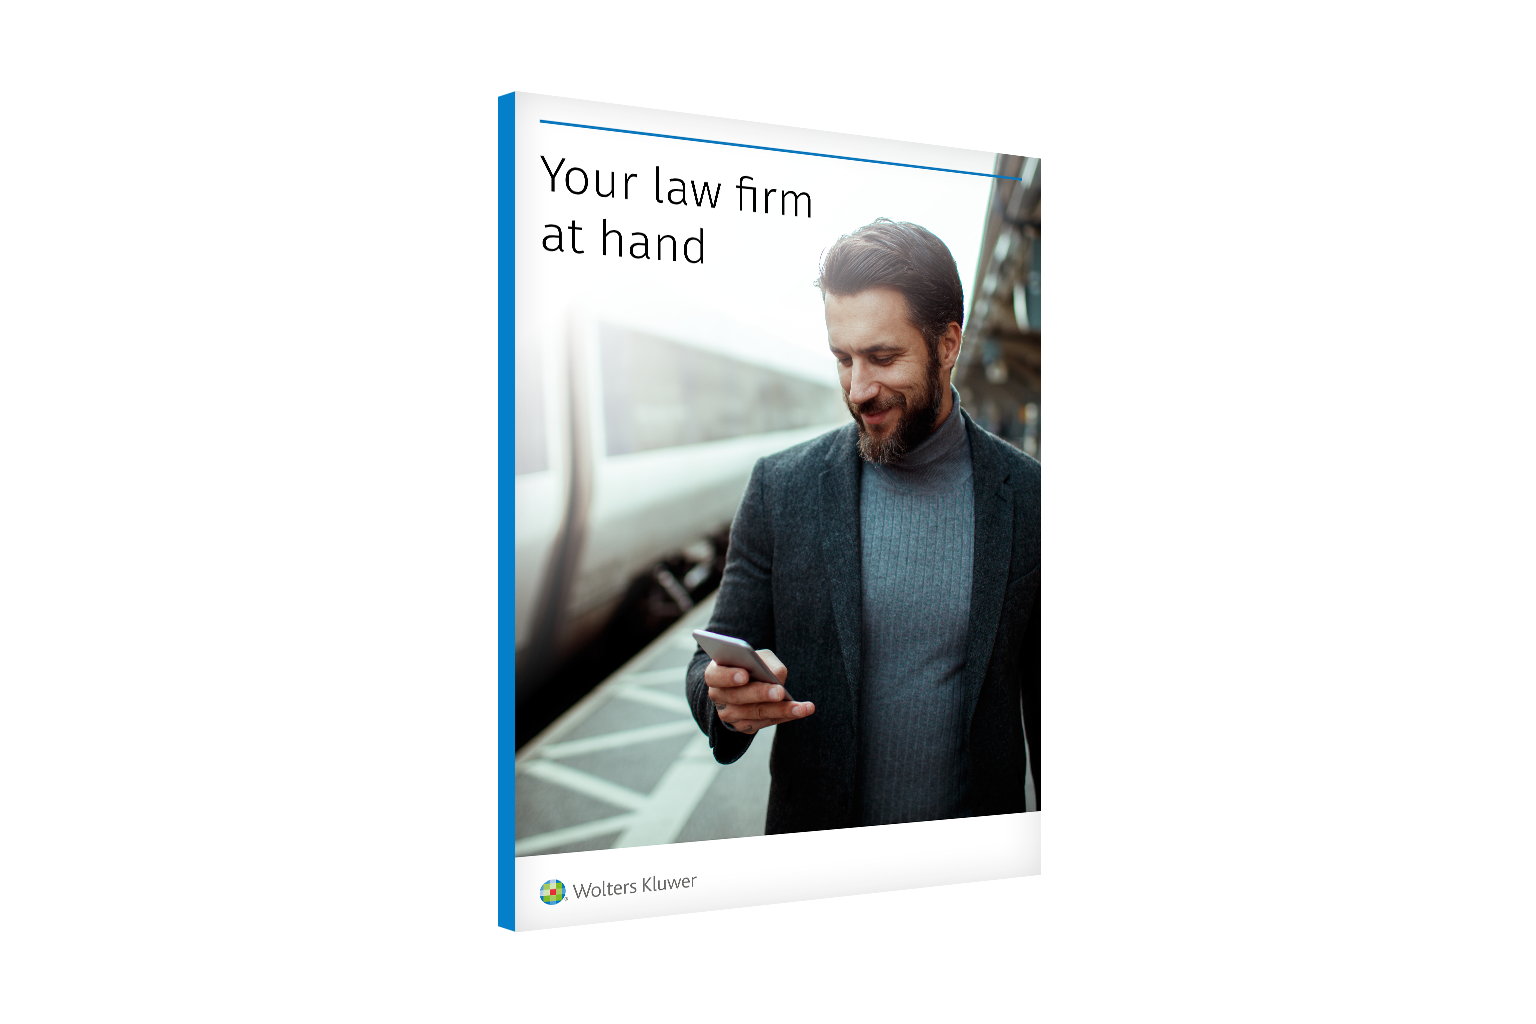 3D Cover_Your law firm at hand_EN_Card_1536x1024.png